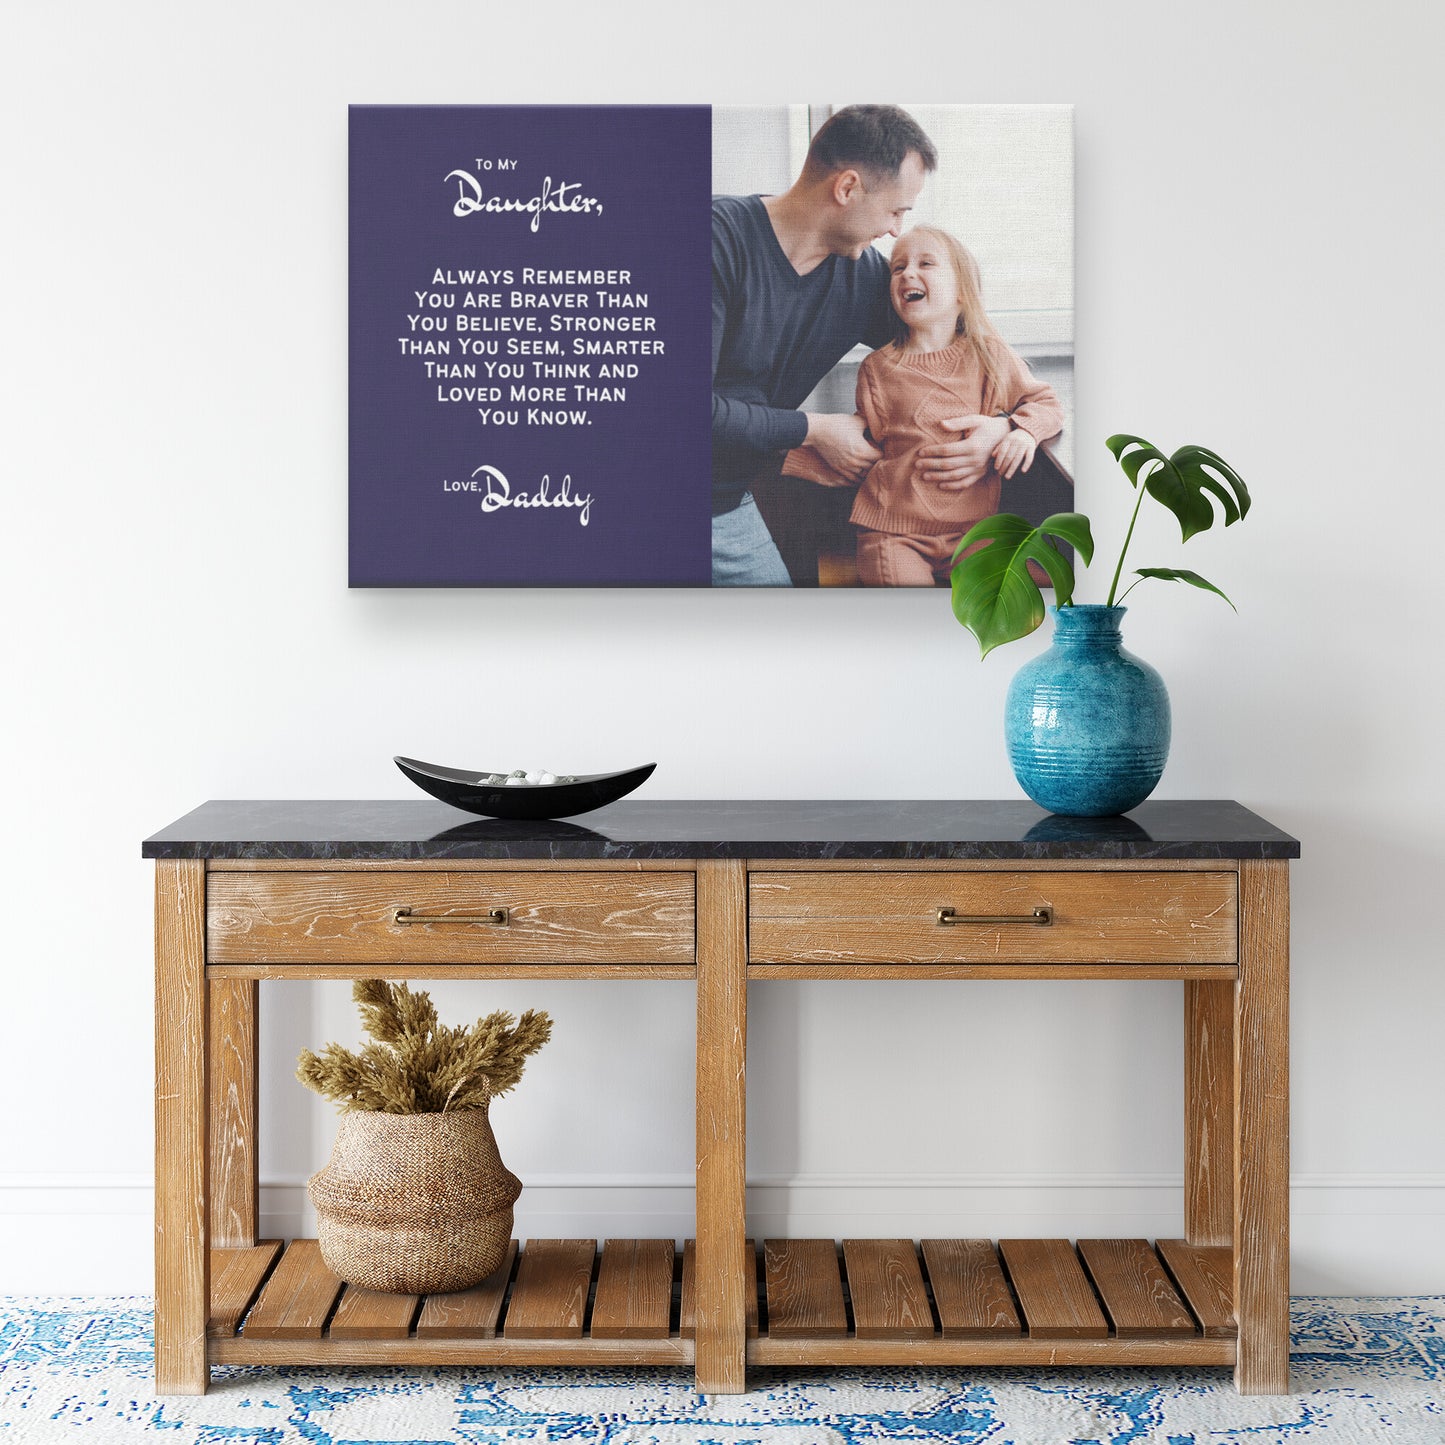 Personalized Daddy/Daughter, Loved More Than You Know Canvas Wall Art